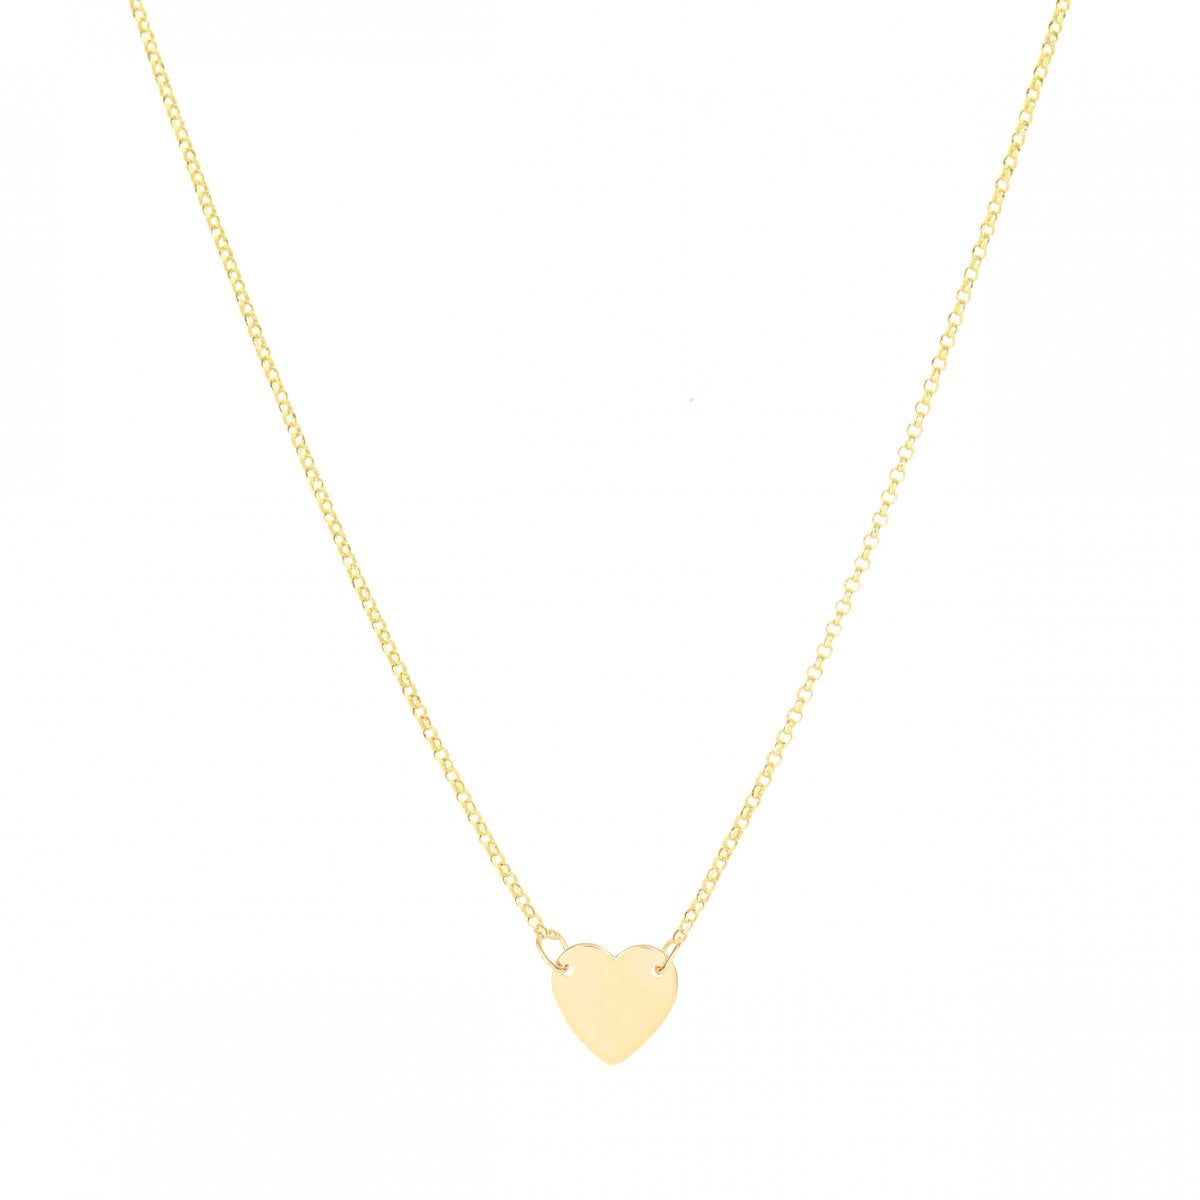 Fall In Love- 14K Gold Heart Necklace- Lola James Jewelry 